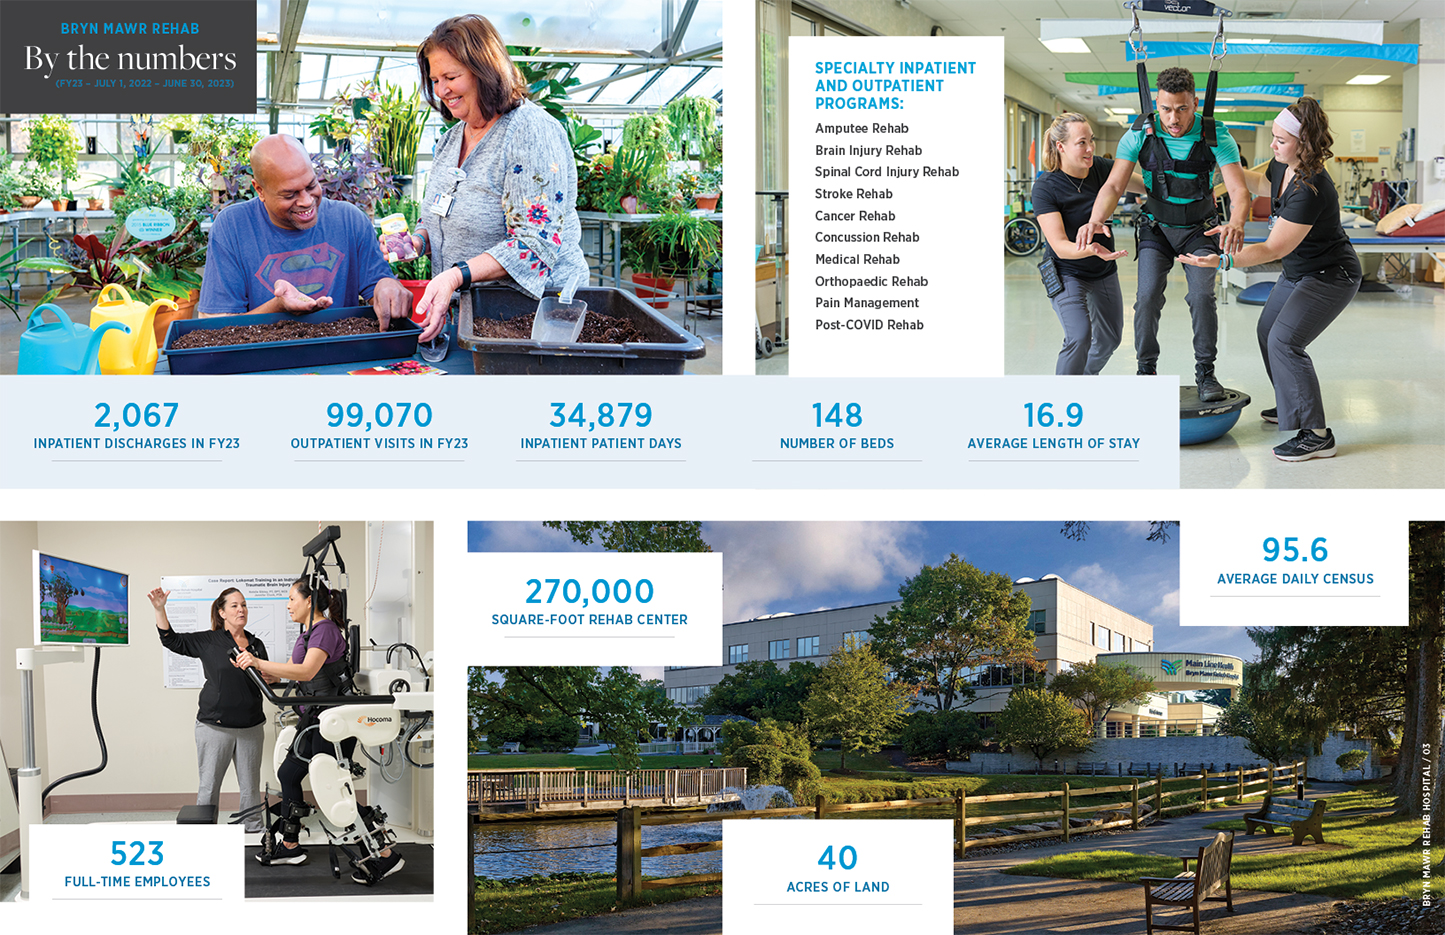 Bryn Mawr Rehab By the numbers FY23